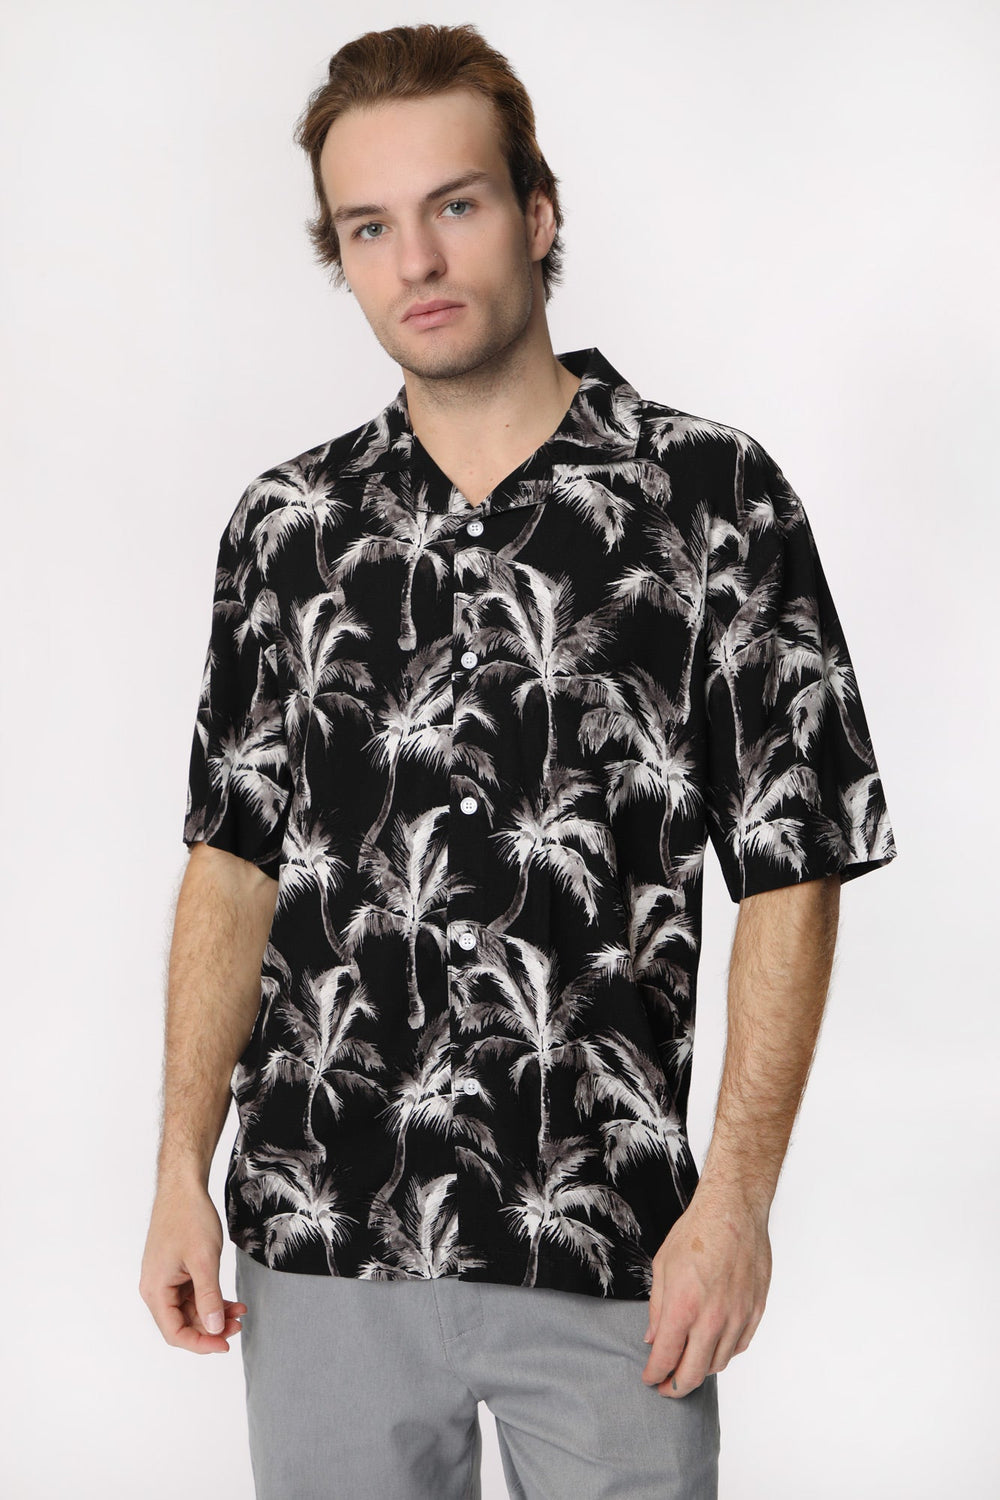 West49 Mens Printed Rayon Button-Up West49 Mens Printed Rayon Button-Up